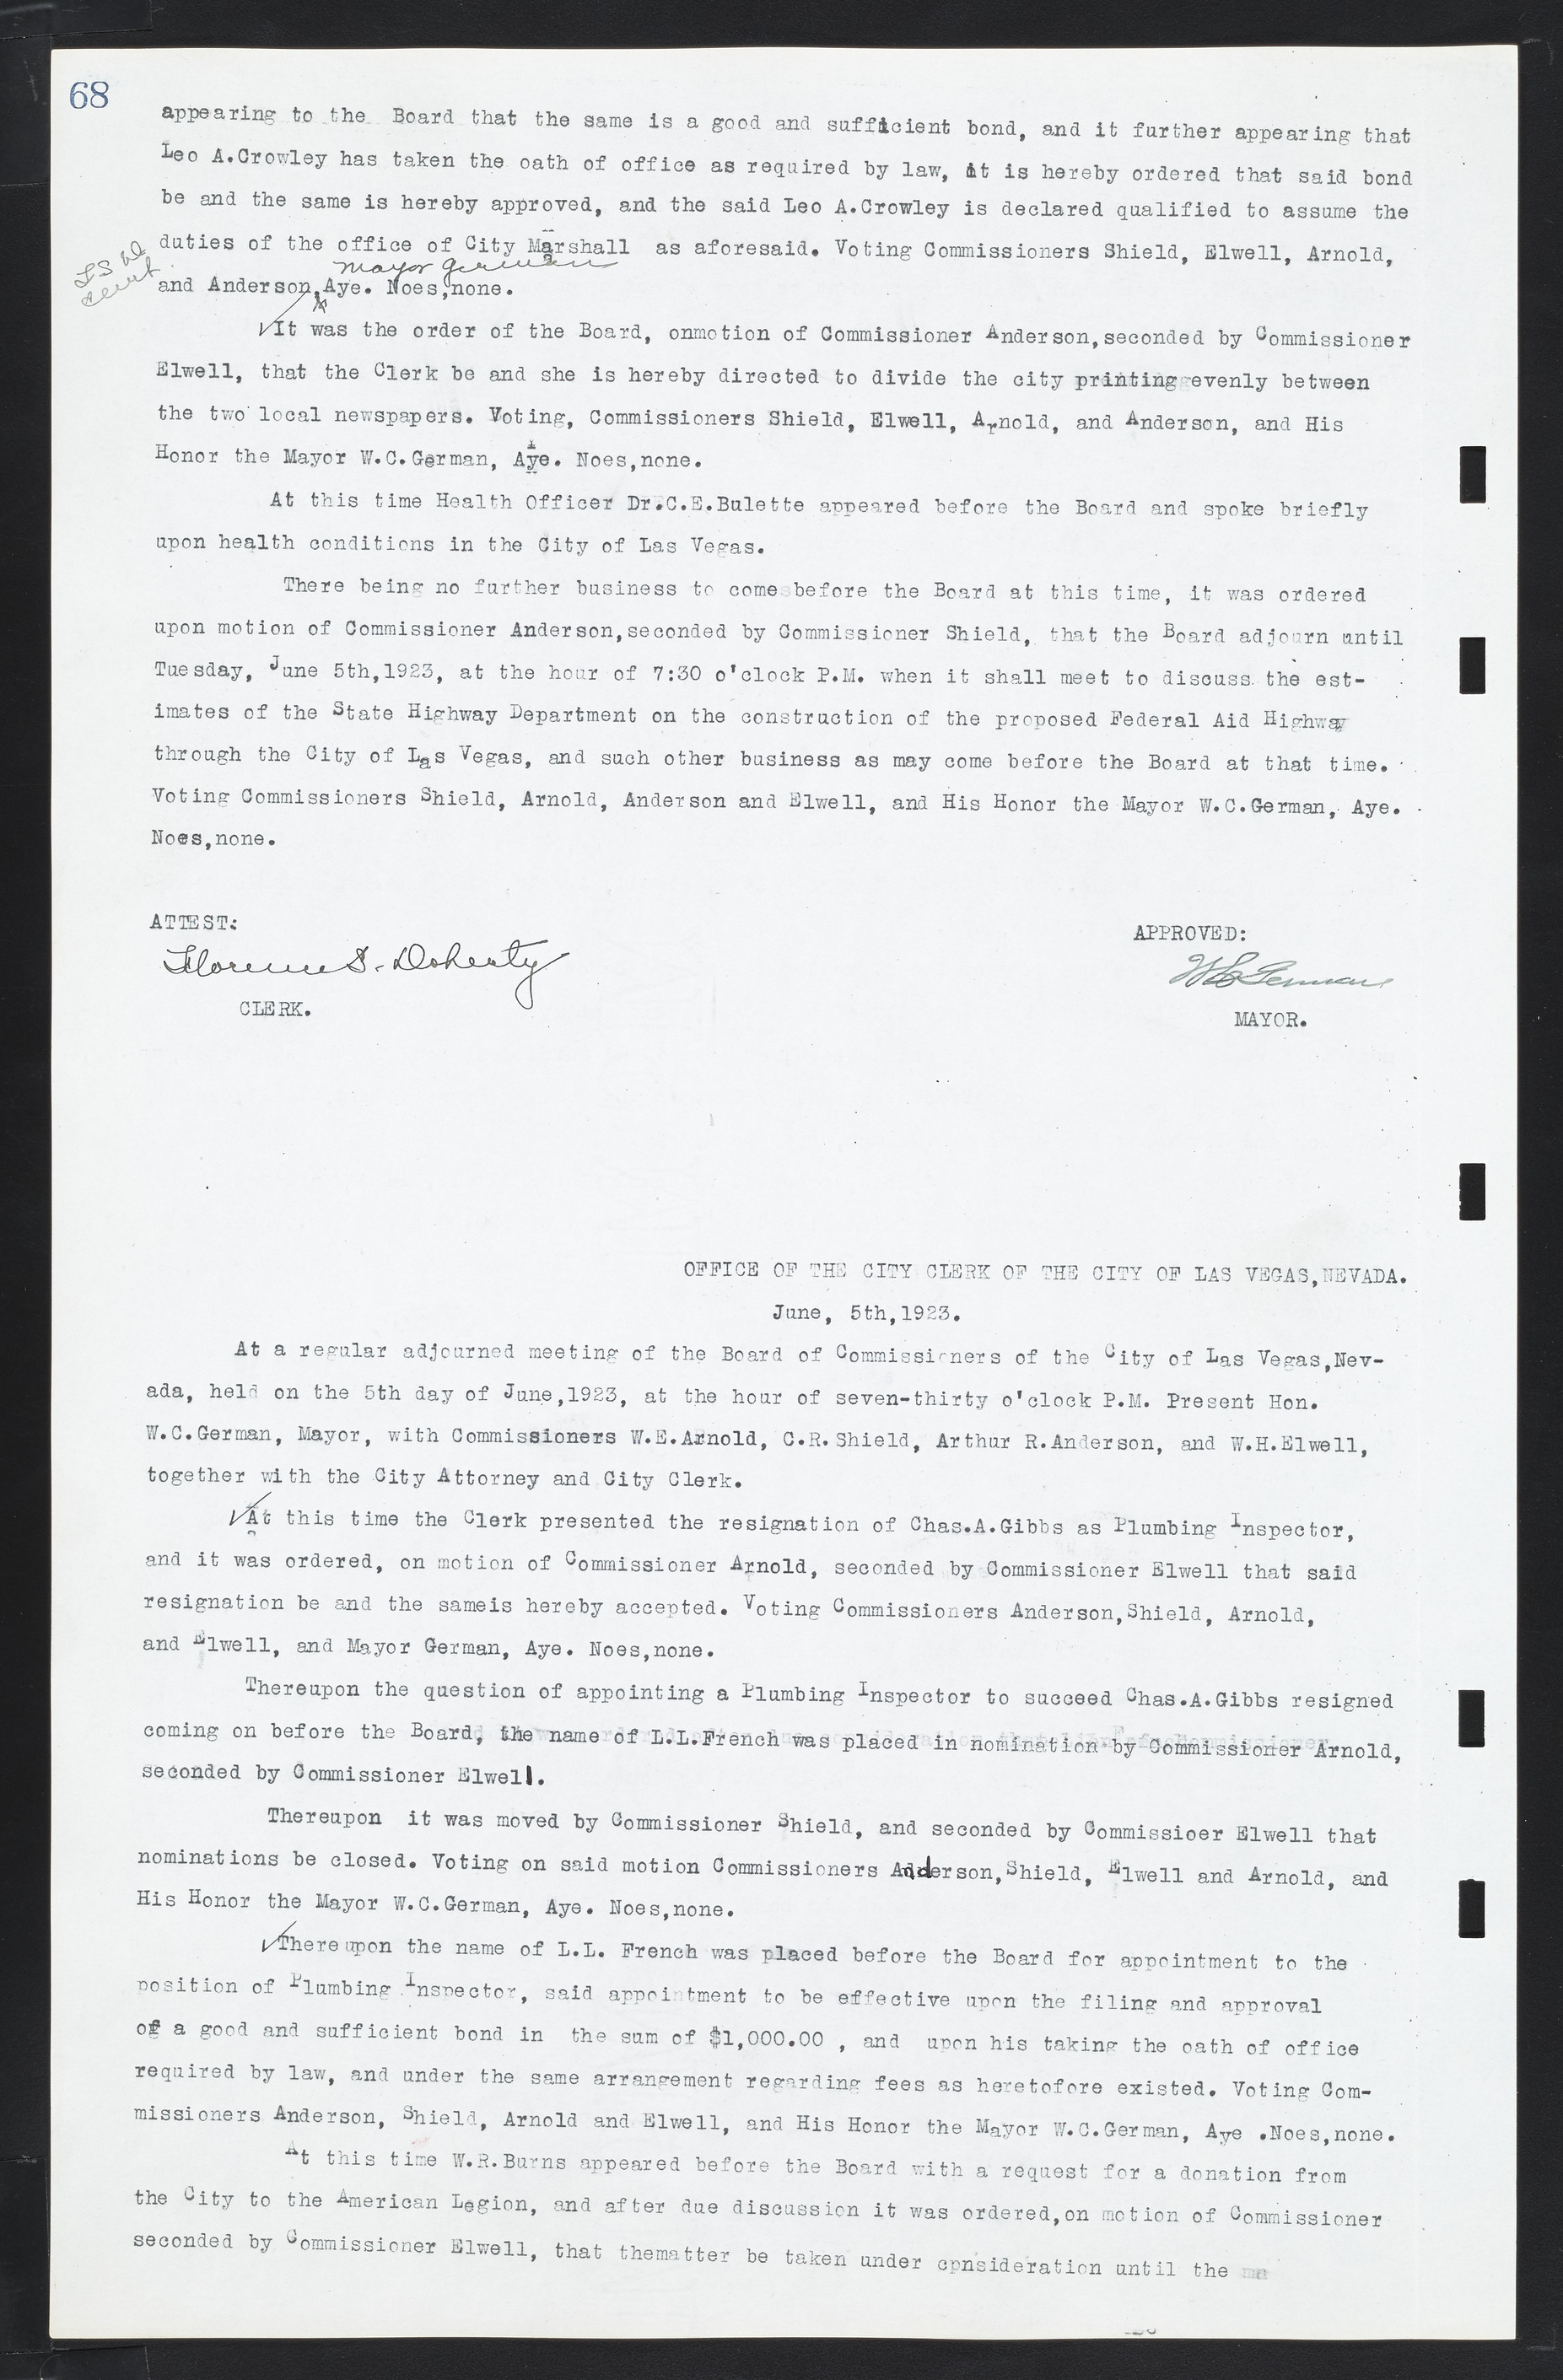 Las Vegas City Commission Minutes, March 1, 1922 to May 10, 1929, lvc000002-75